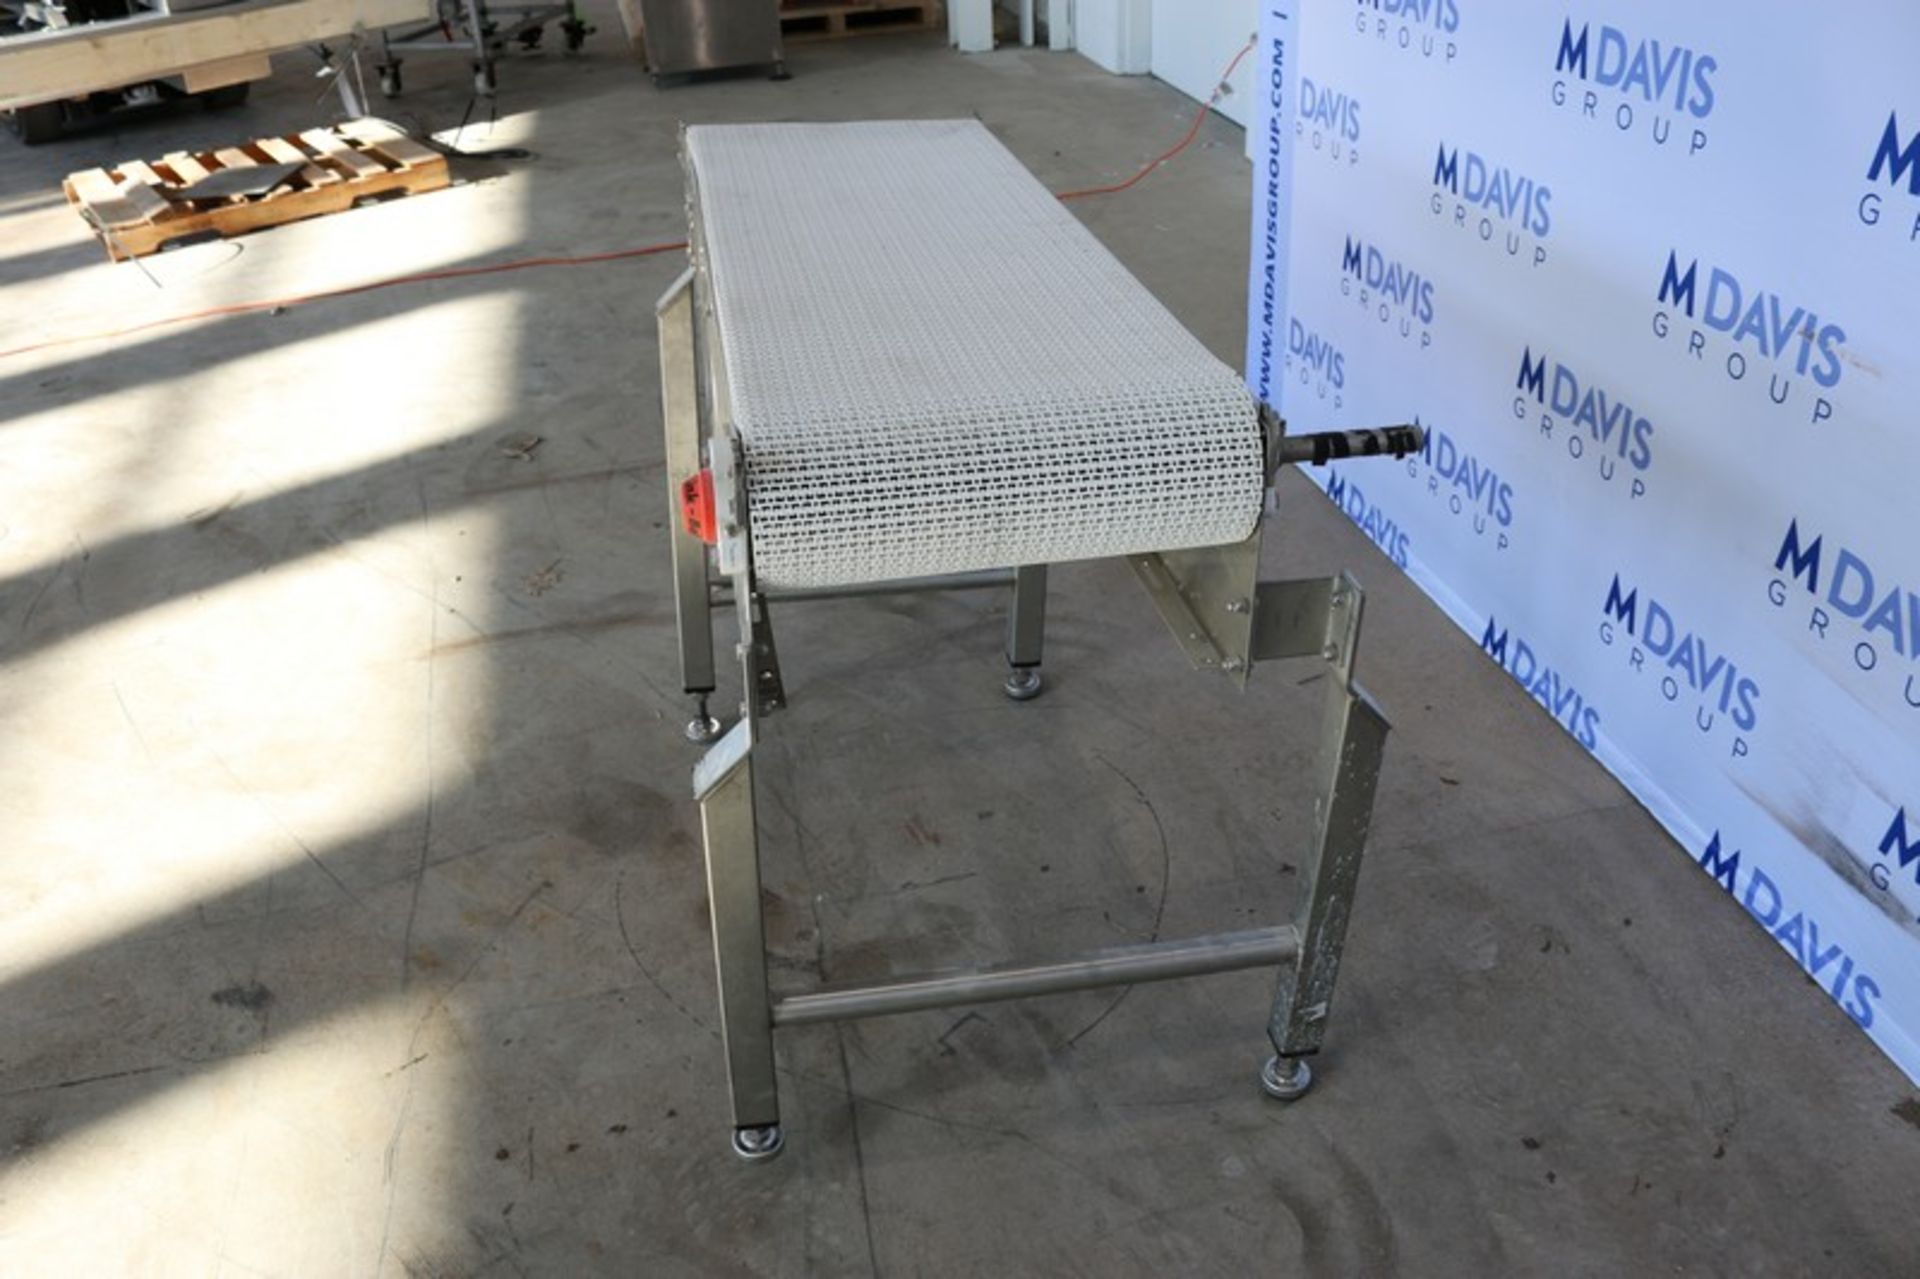 Straight Section of S/S Conveyor, with White Interlock Belt, Aprox. 55" L x 18" H Belt, Mounted on - Image 8 of 8